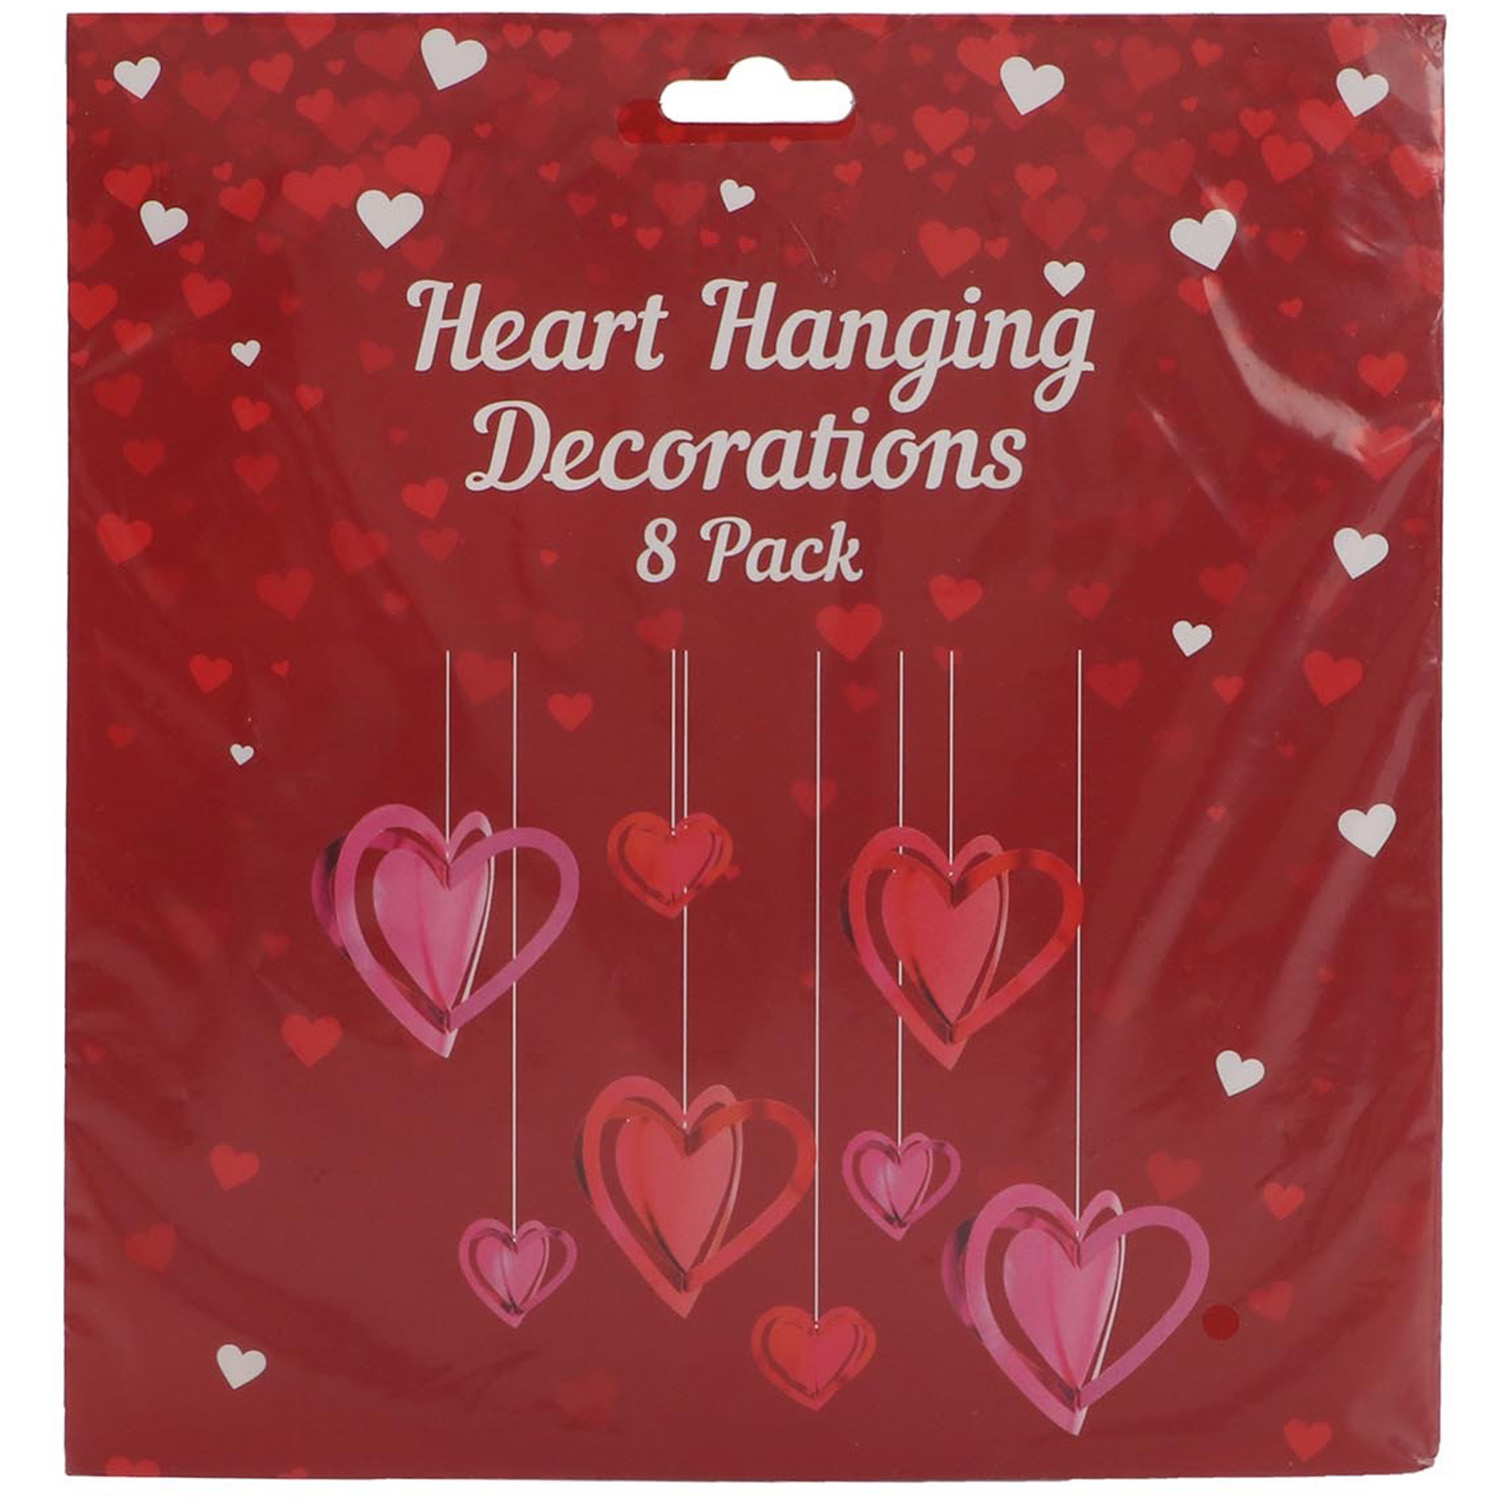 Pack of 8 Heart Hanging Decorations Image 1